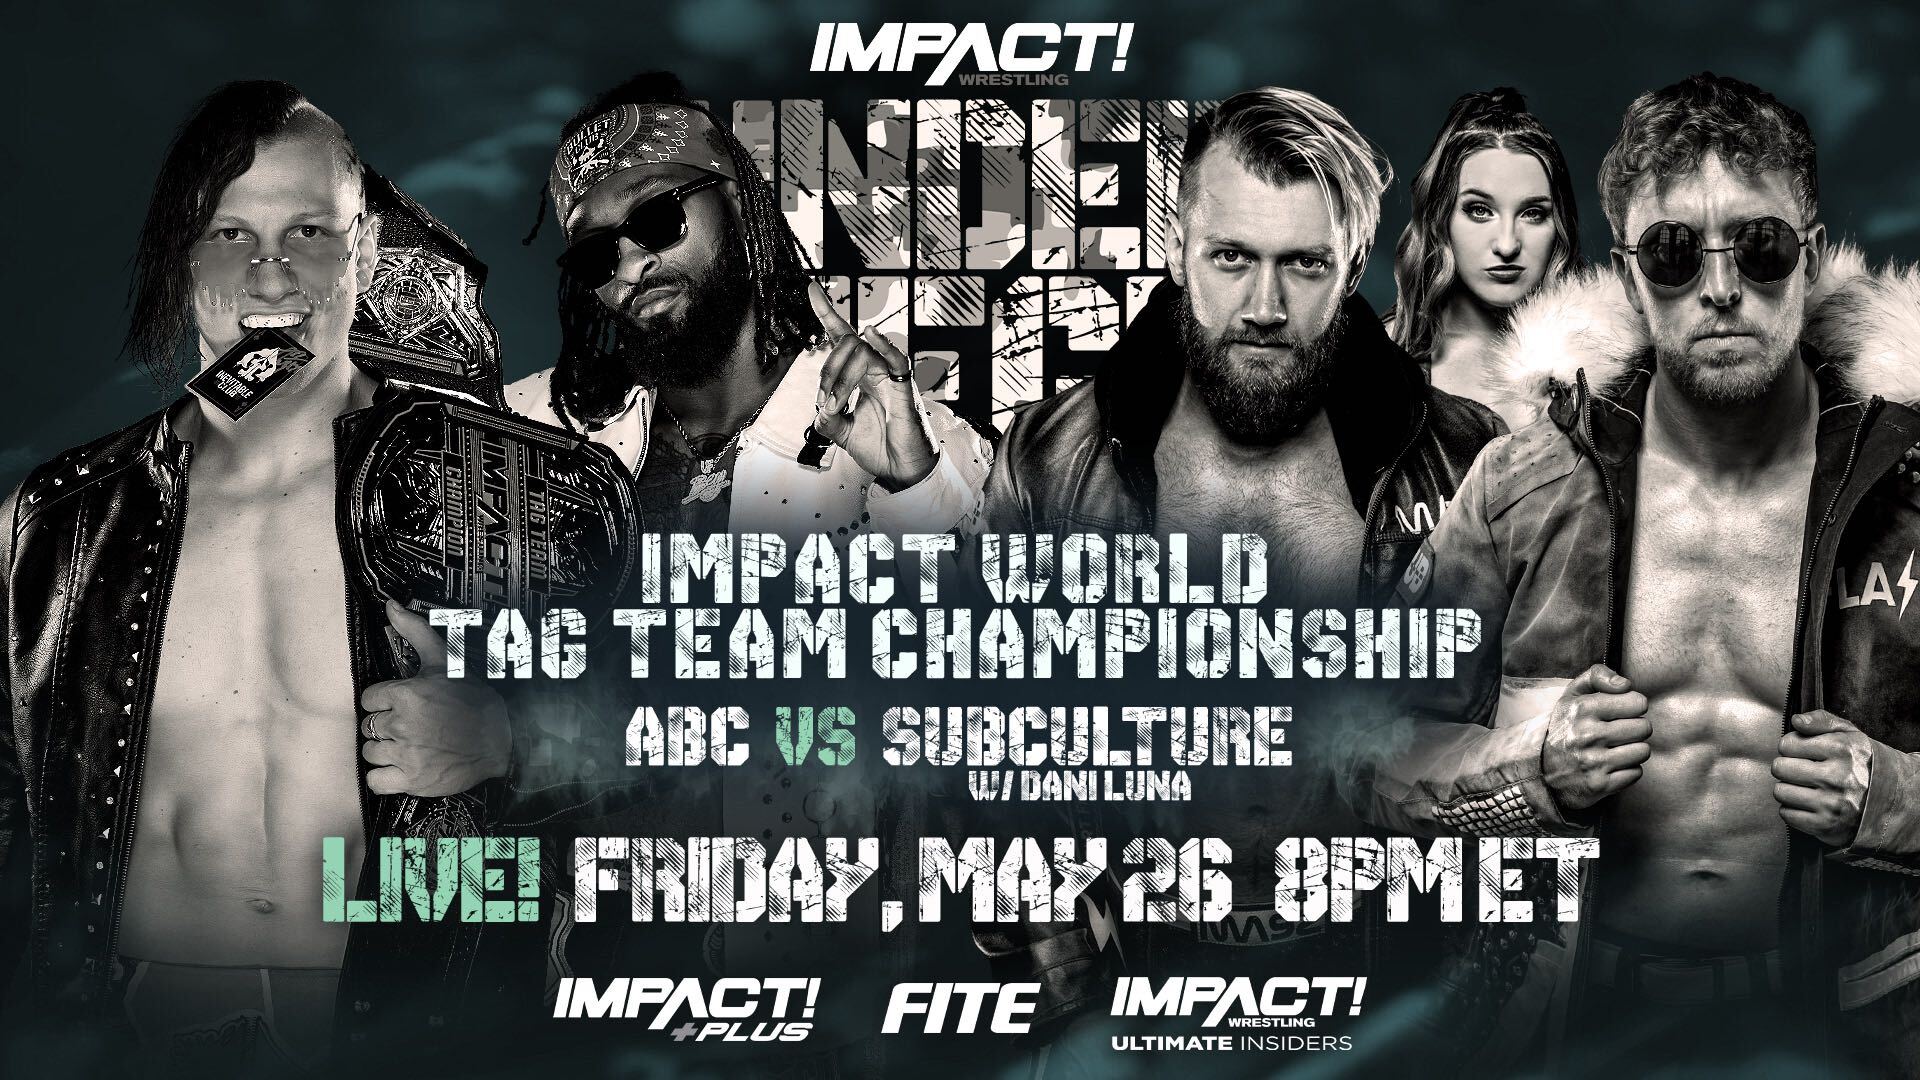 SUBCULTURE Bursts Onto the Scene for a Golden Opportunity at Under Siege – IMPACT Wrestling